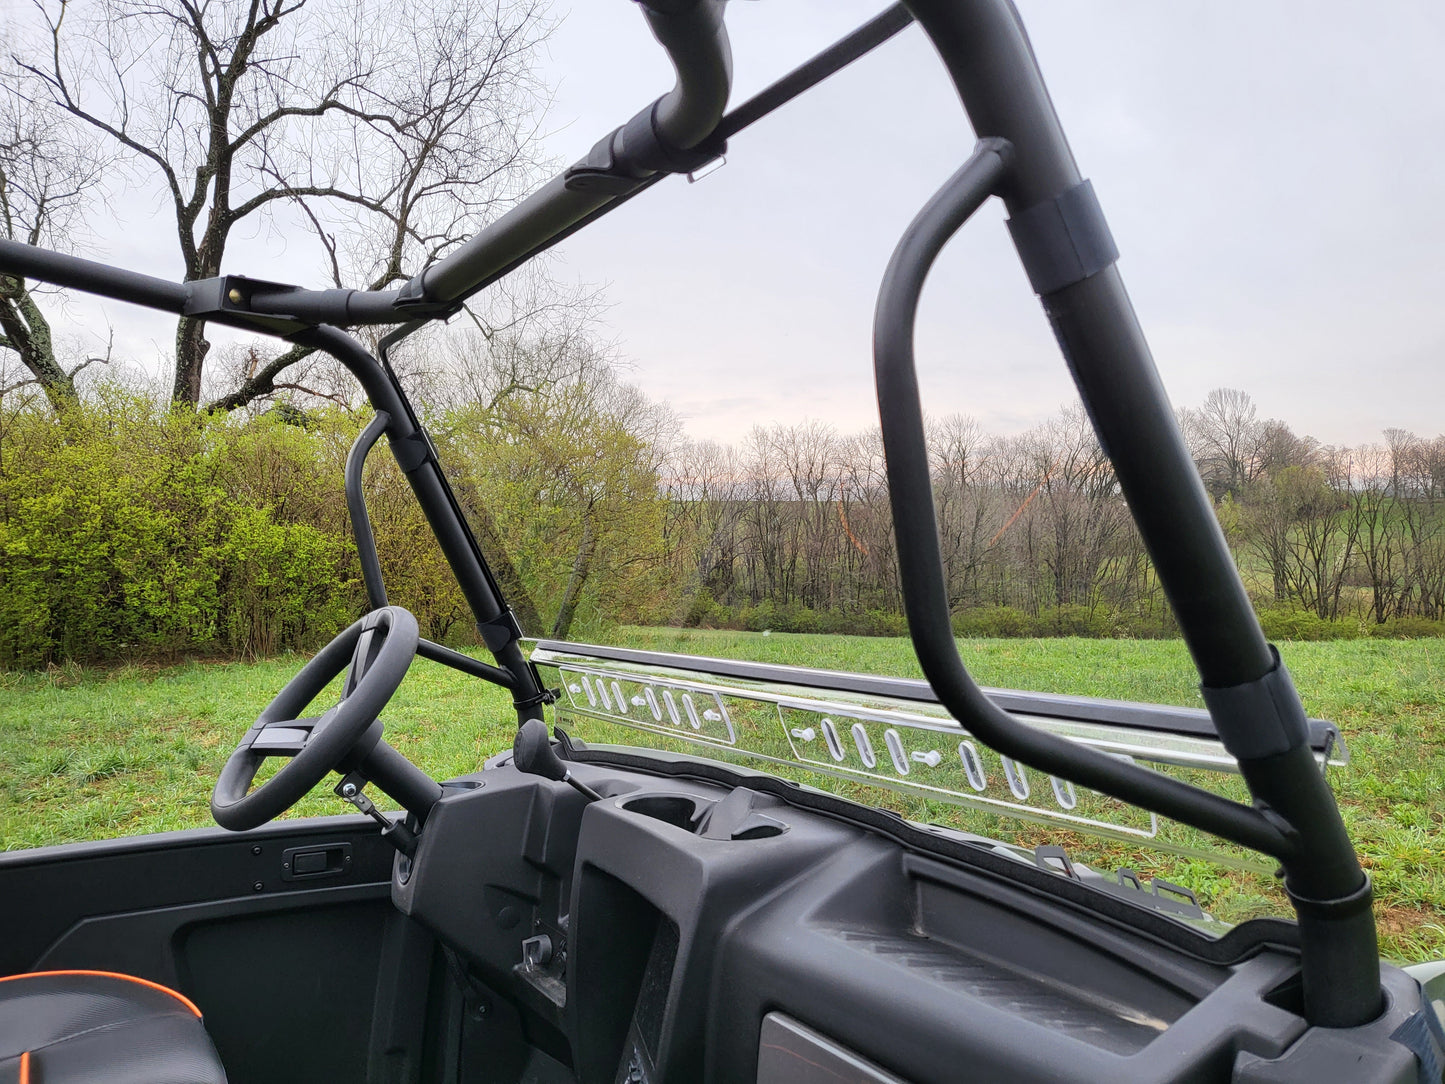 Intimidator GC1K 6-Seater - 2 Pc Windshield with Vent, Clamp, and Hard Coat Options - 3 Star UTV